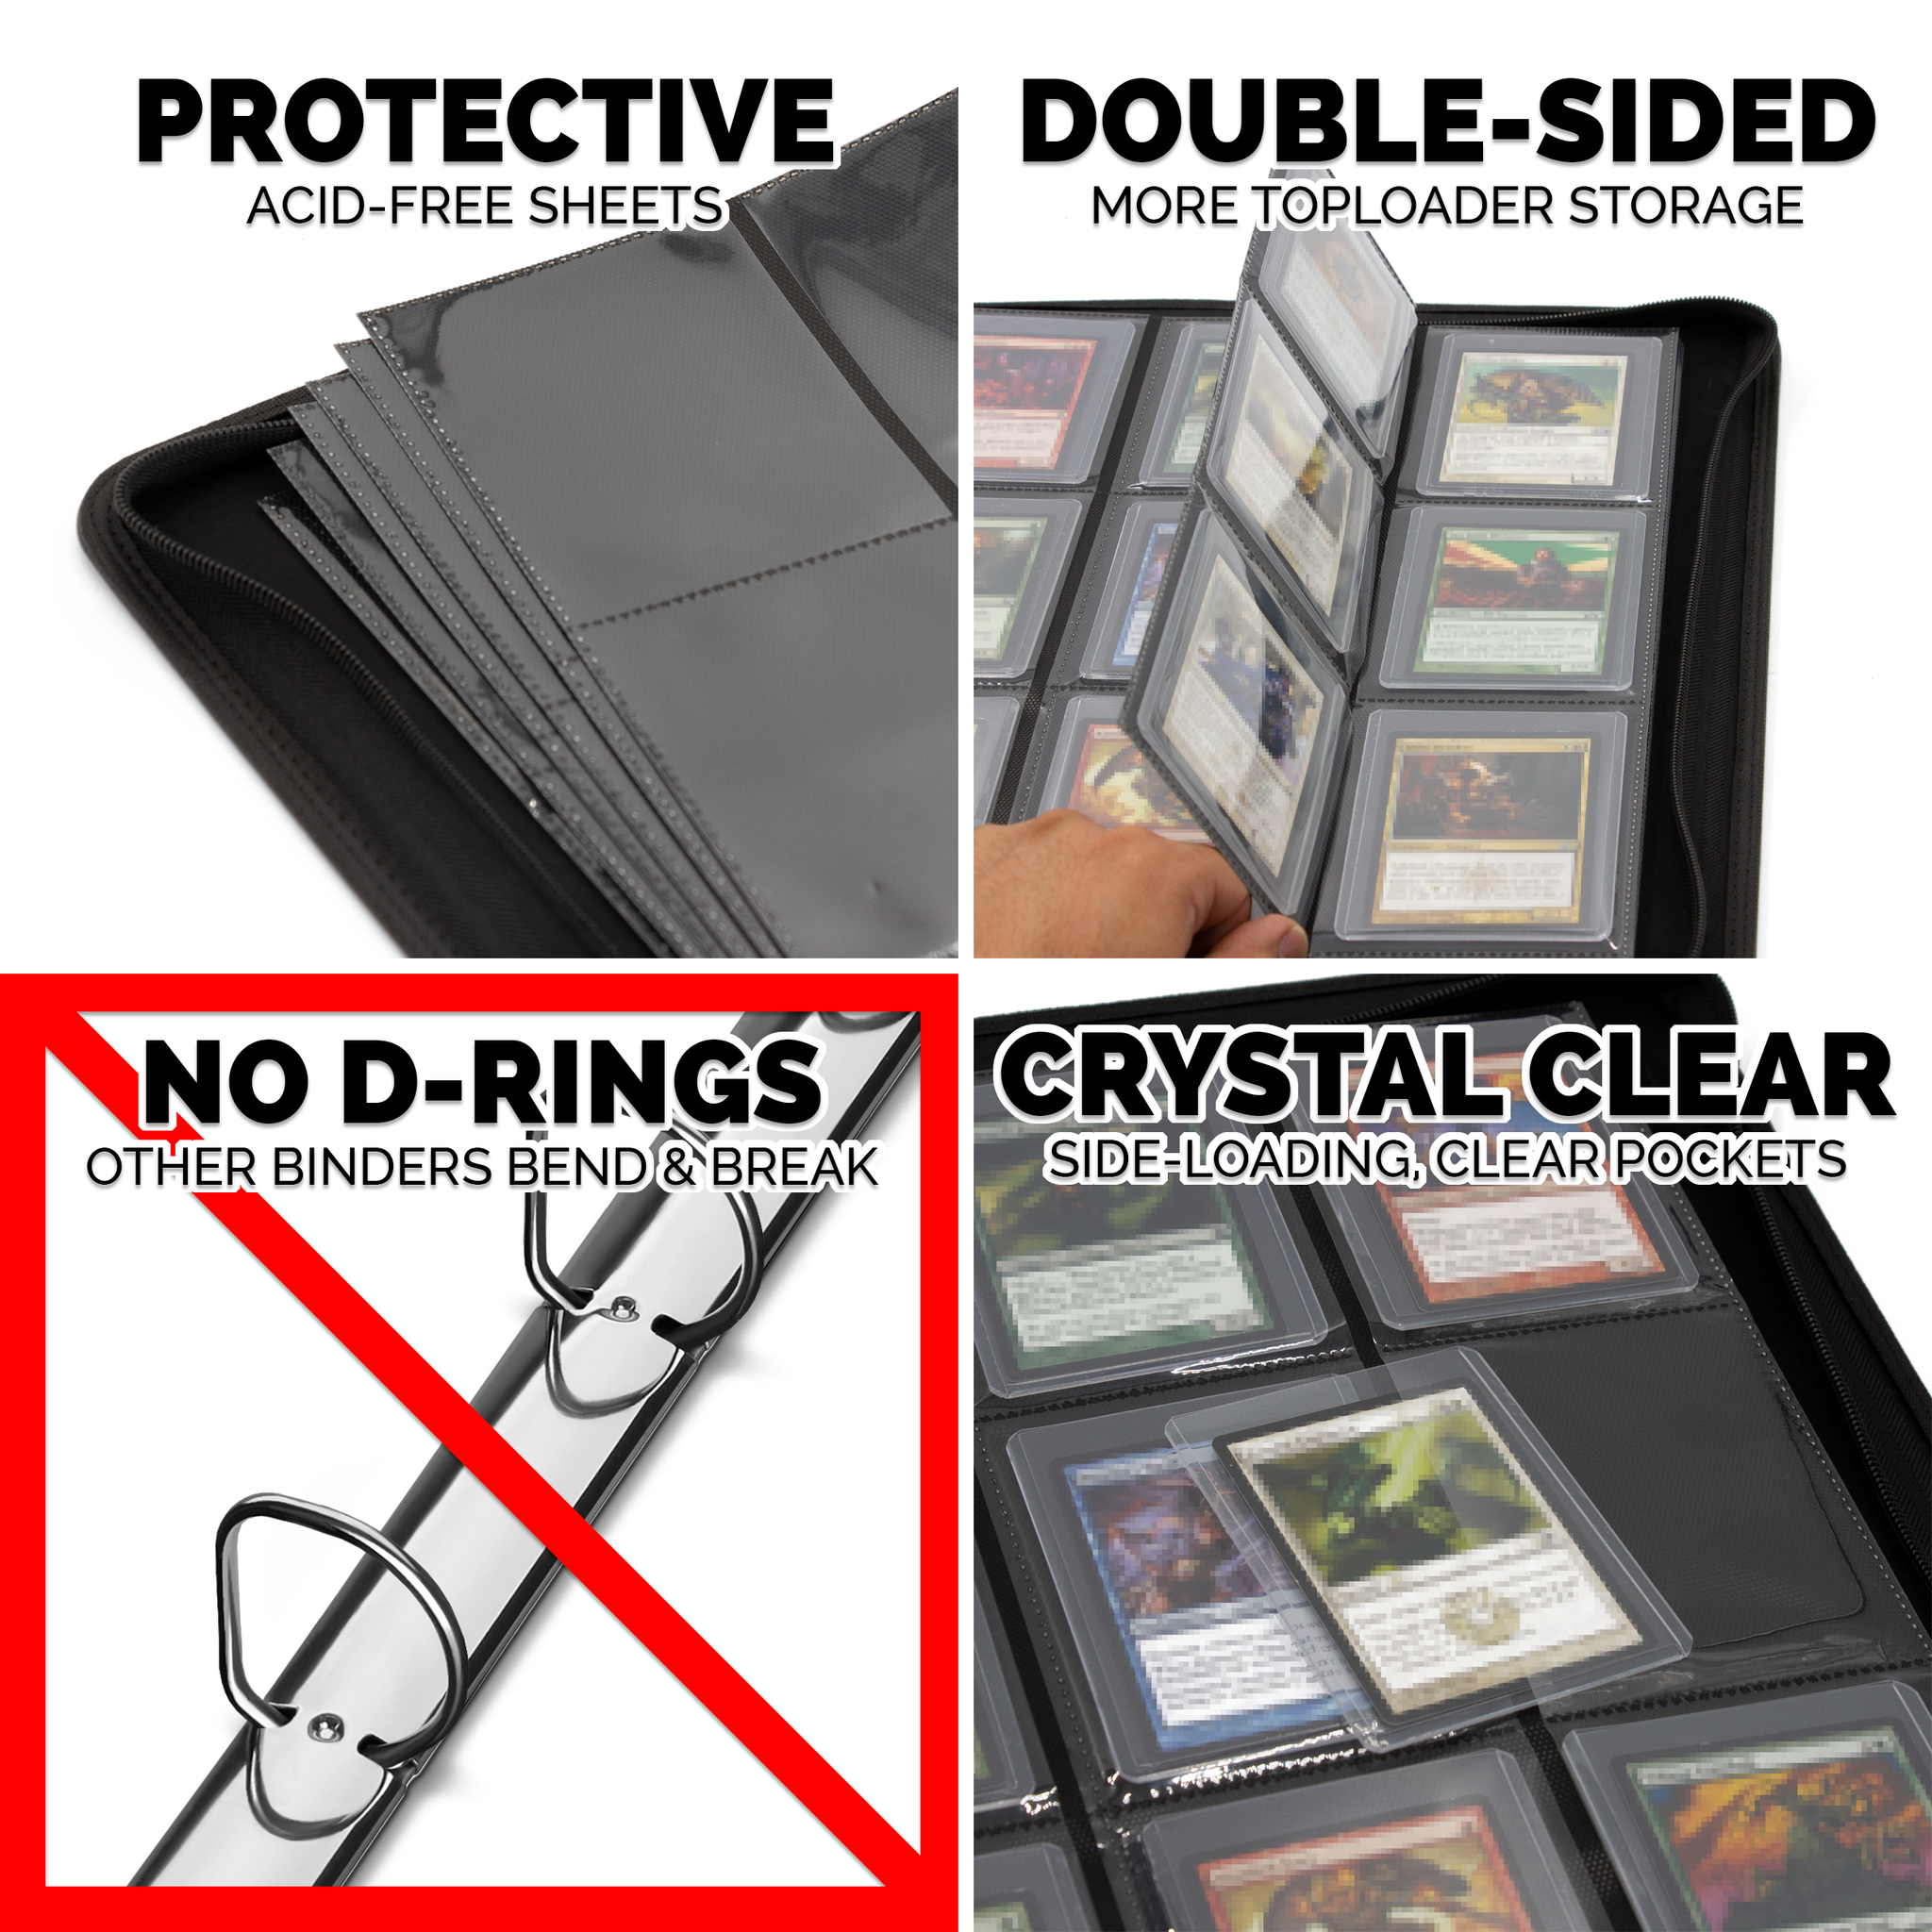 Card Saver Vs. Top Loader: Which To Choose For Trading Cards?– Your Playmat